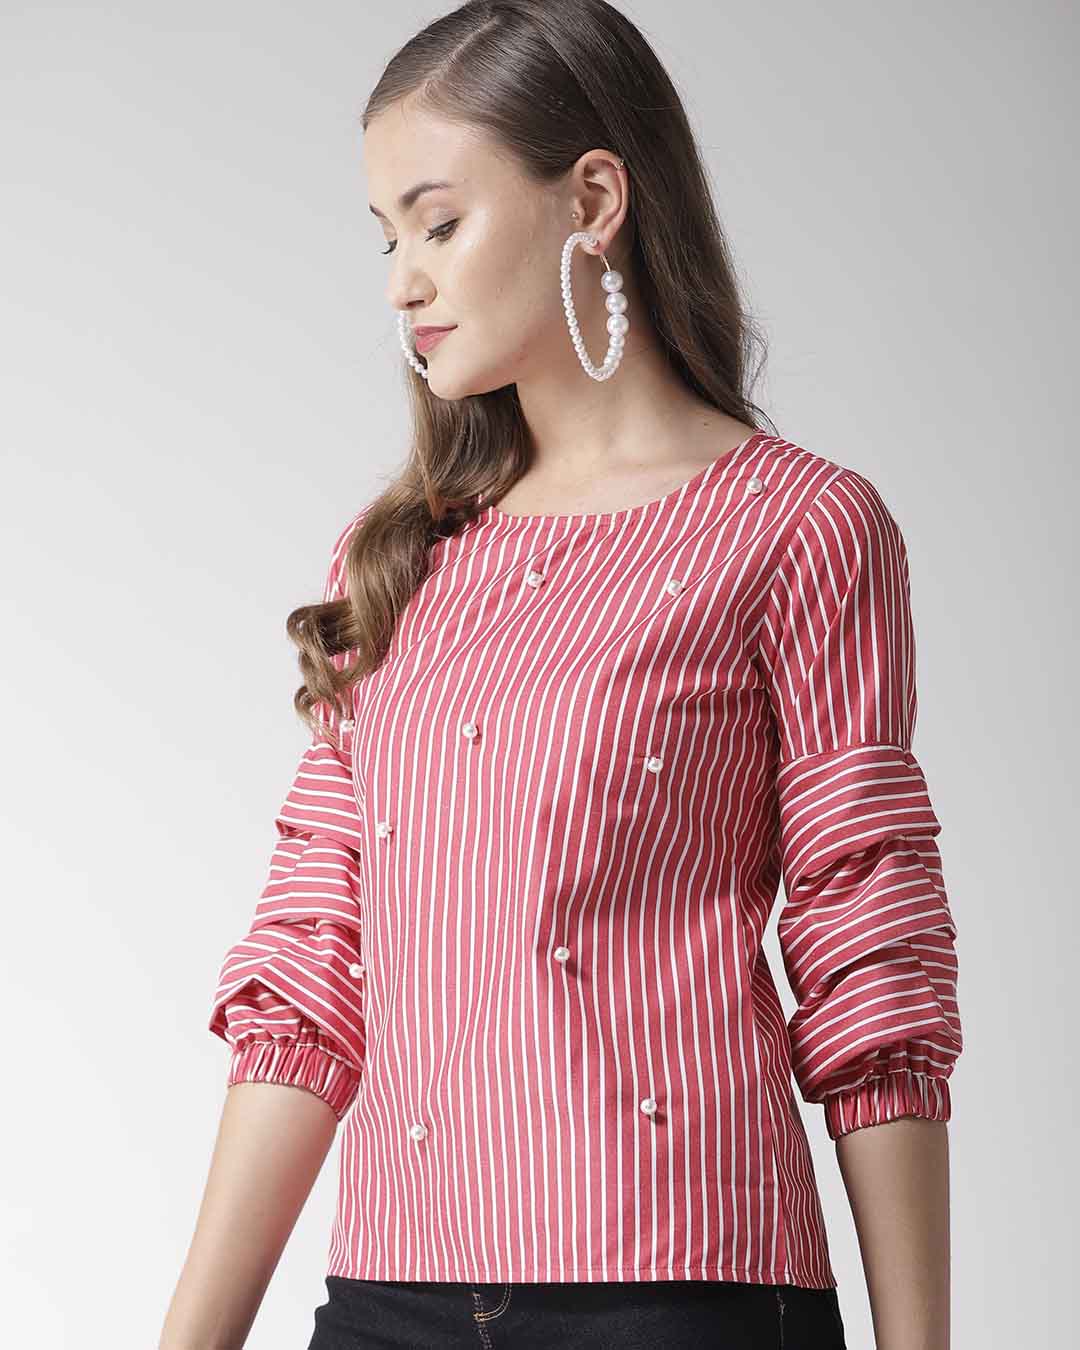 Shop Women's Red & White Striped Top-Back